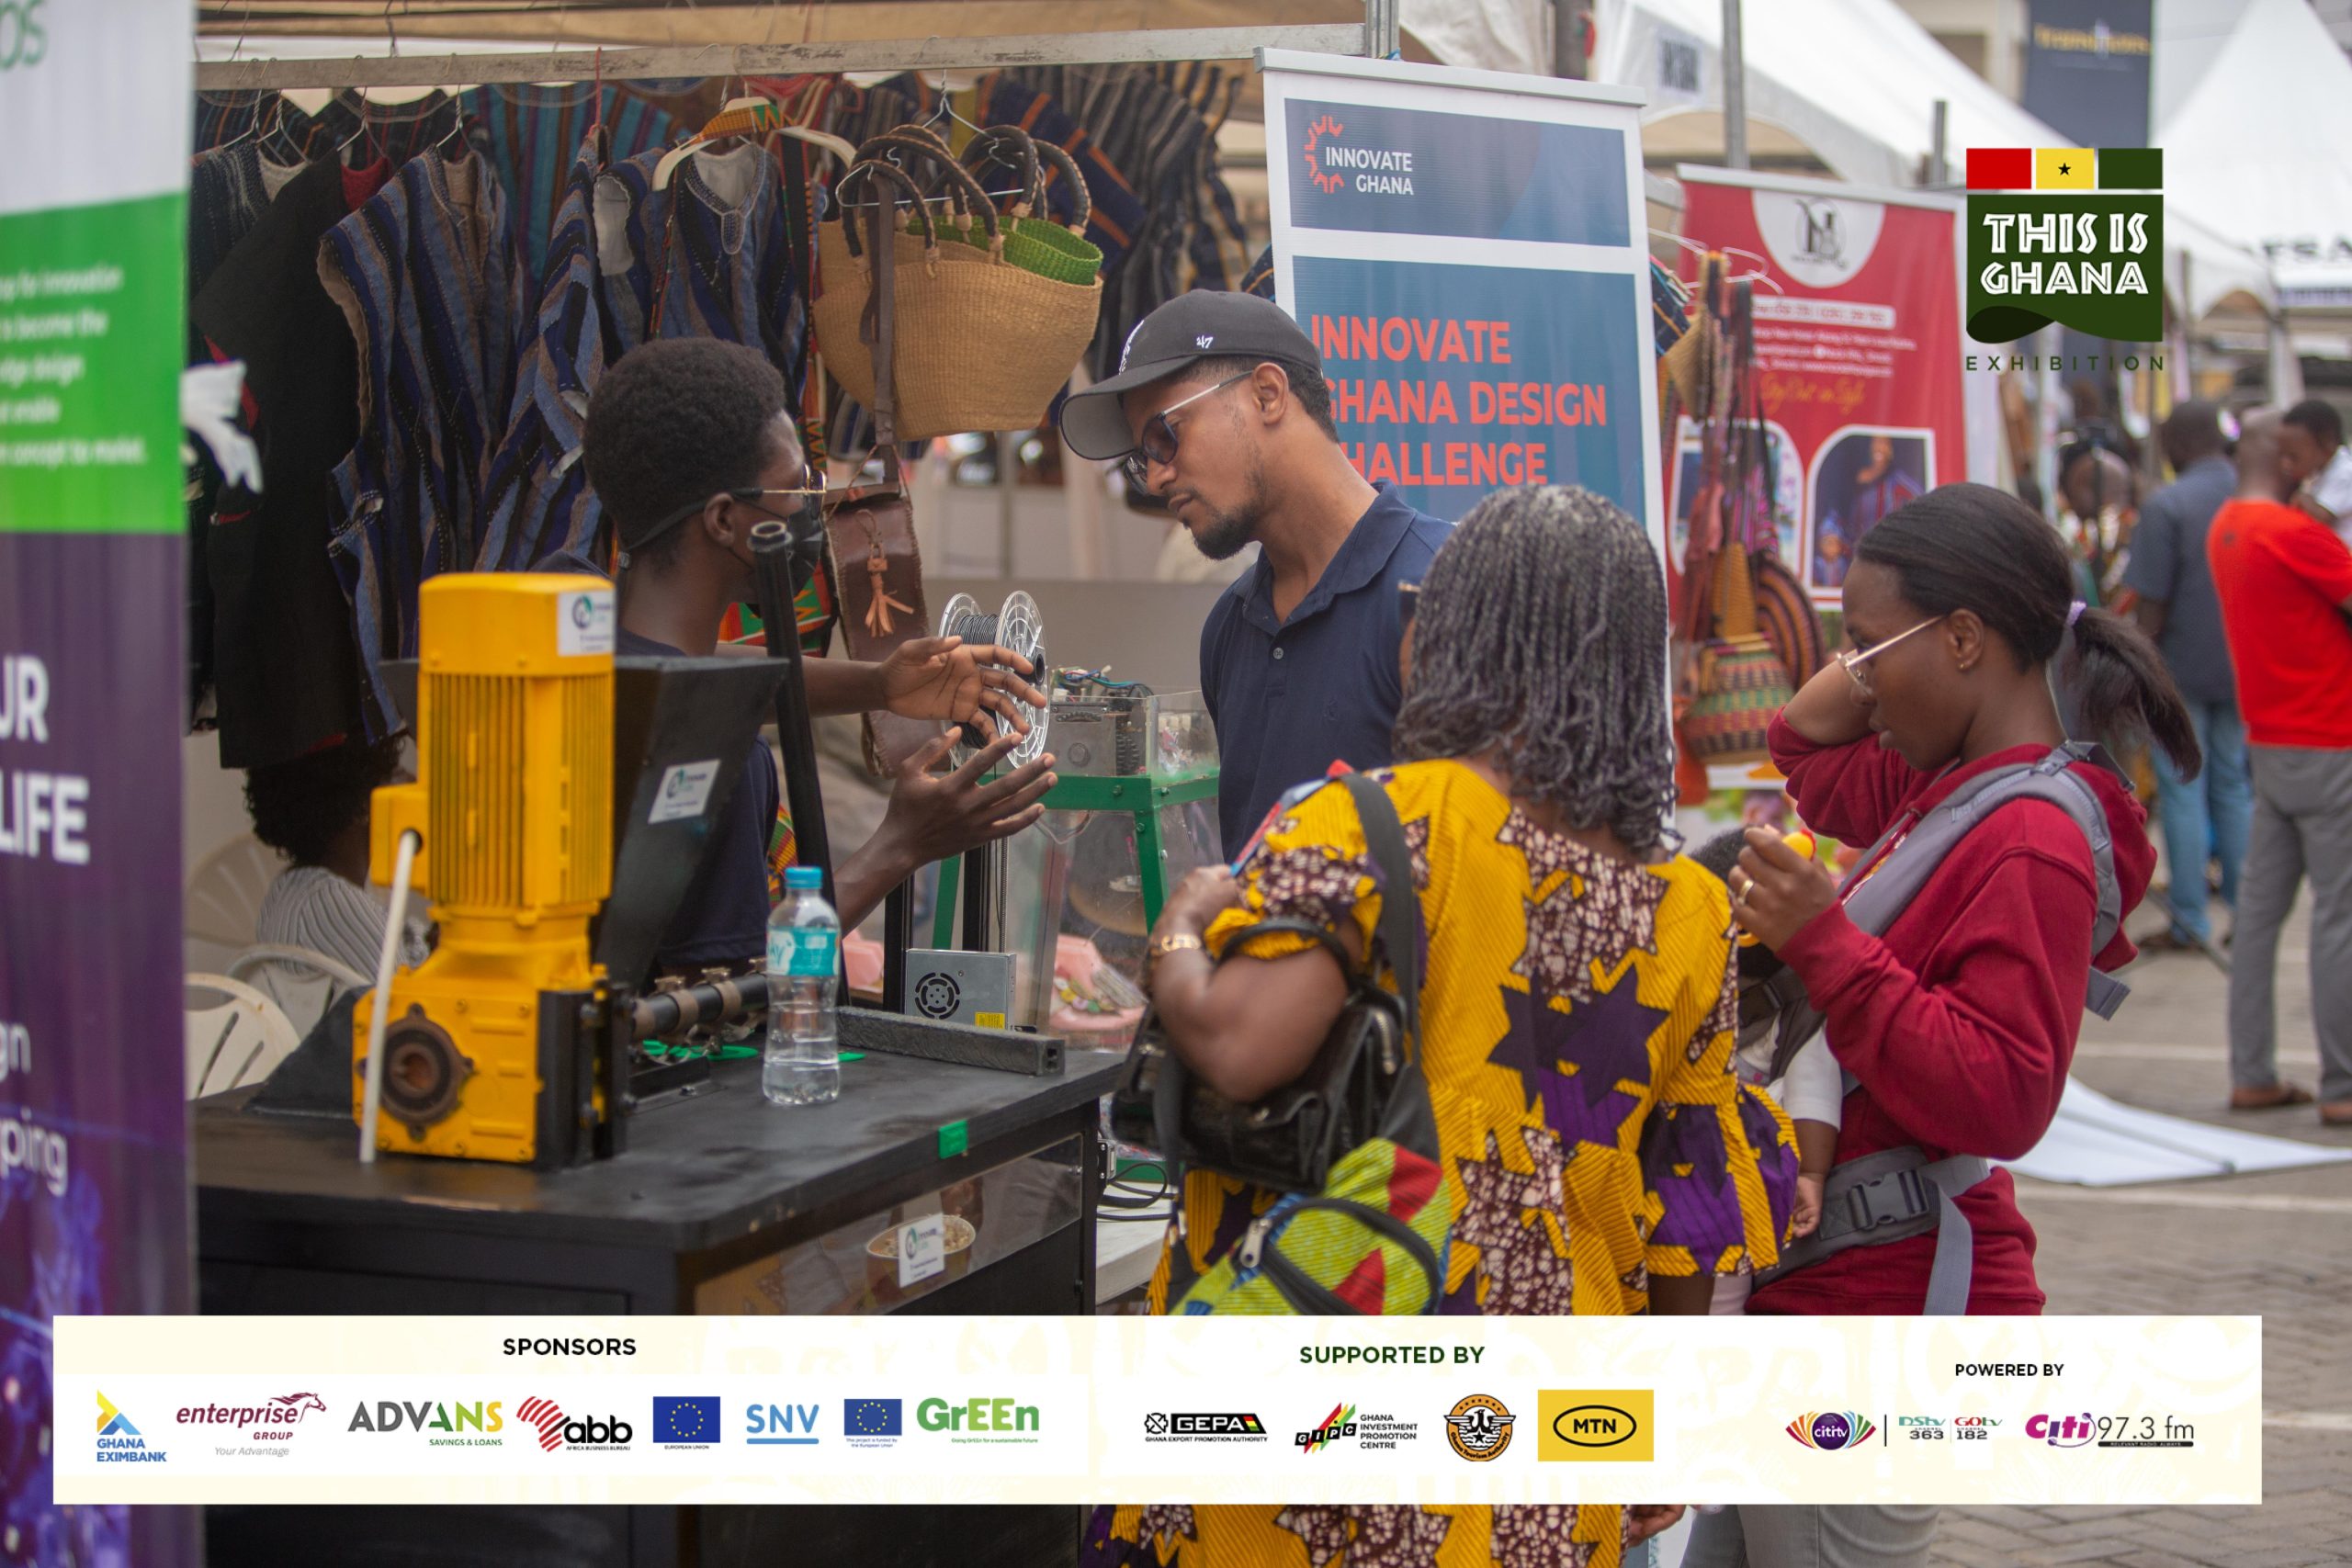 Day 2 of 'This is Ghana Exhibition' ends [Photos]